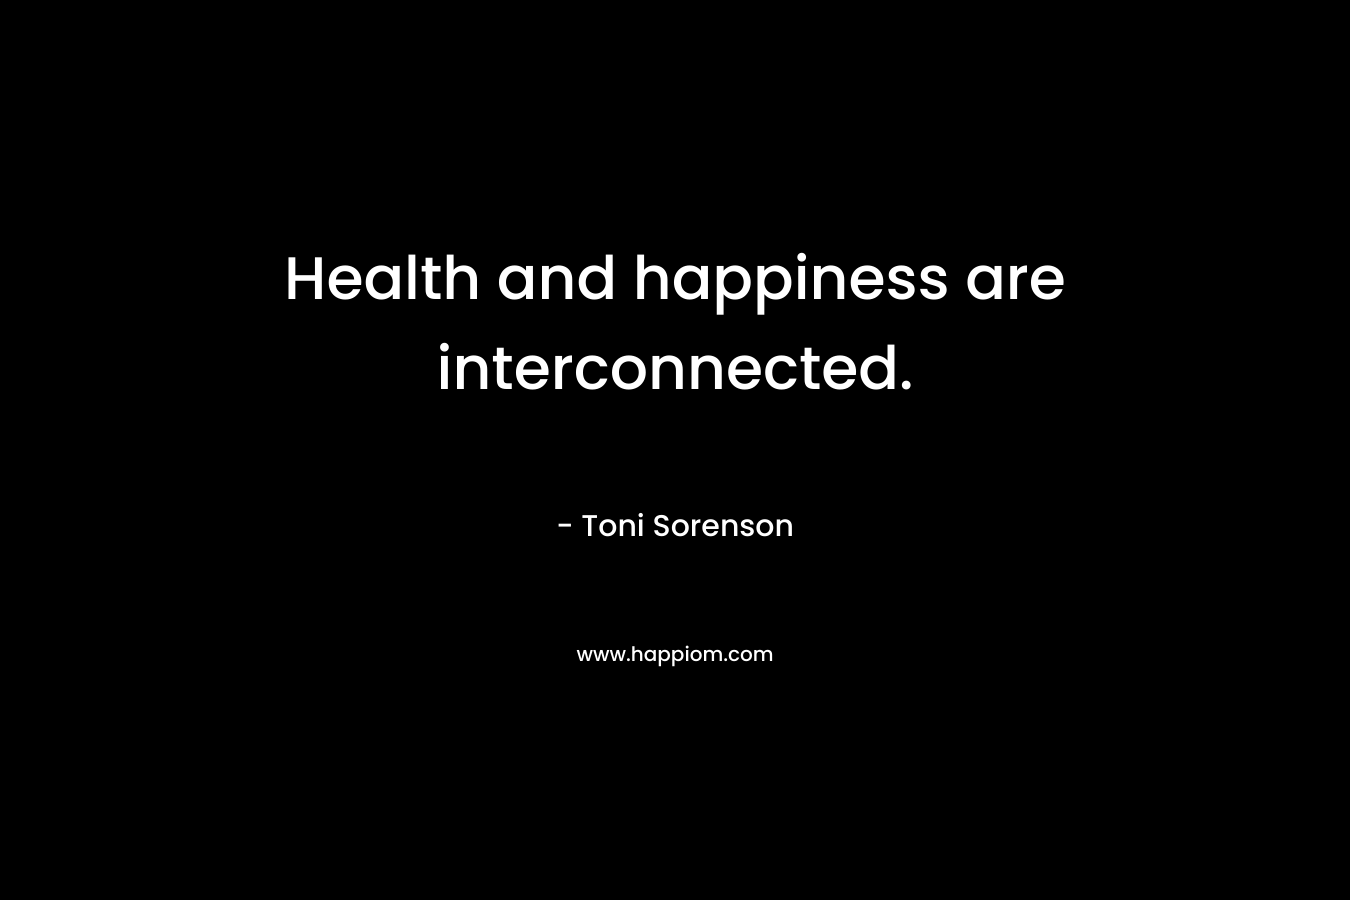 Health and happiness are interconnected. – Toni Sorenson